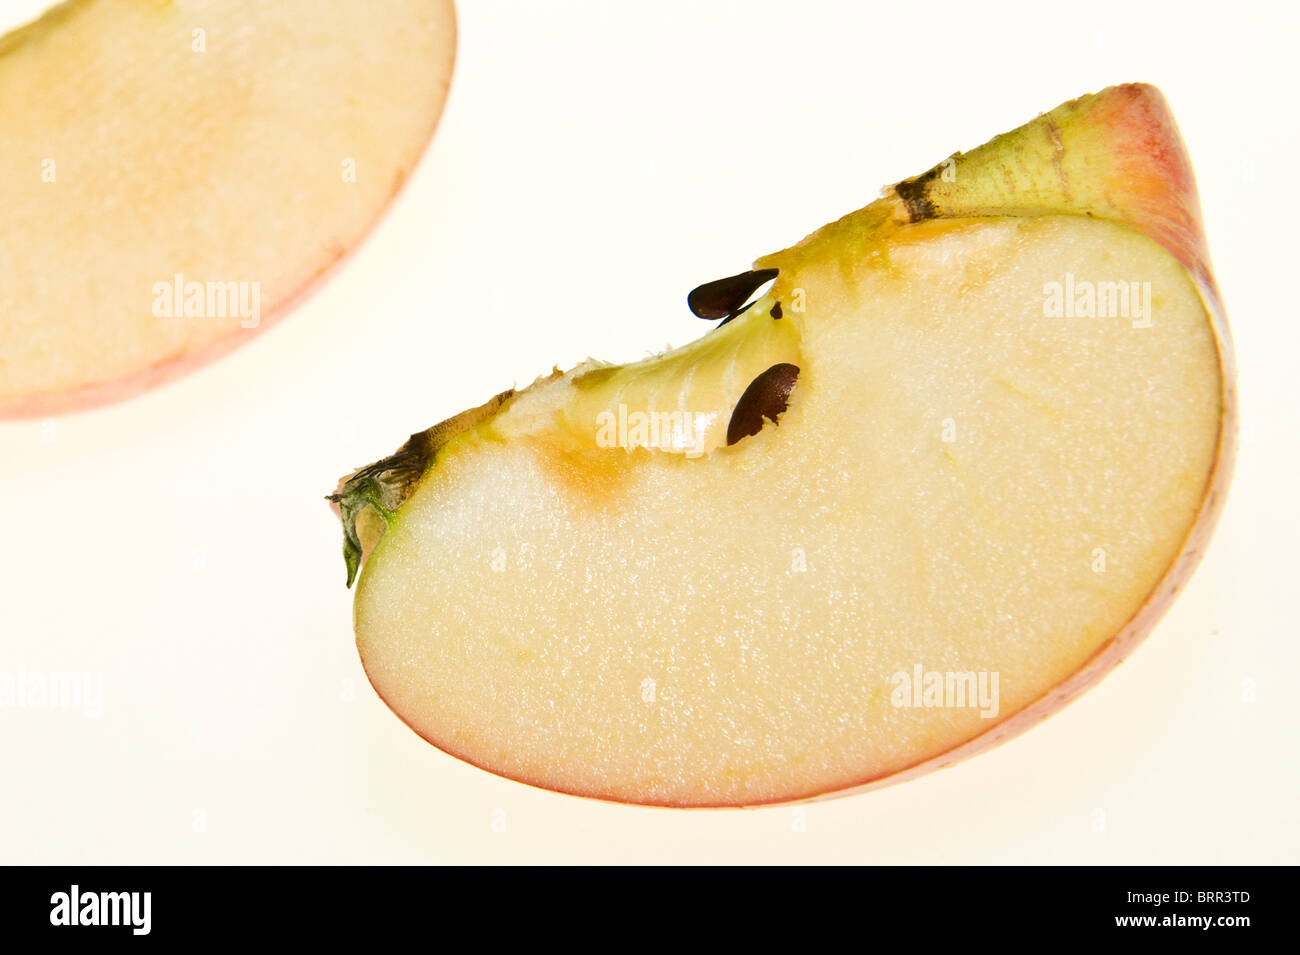 Close-up studio shot of an apple sliced into quarters Stock Photo